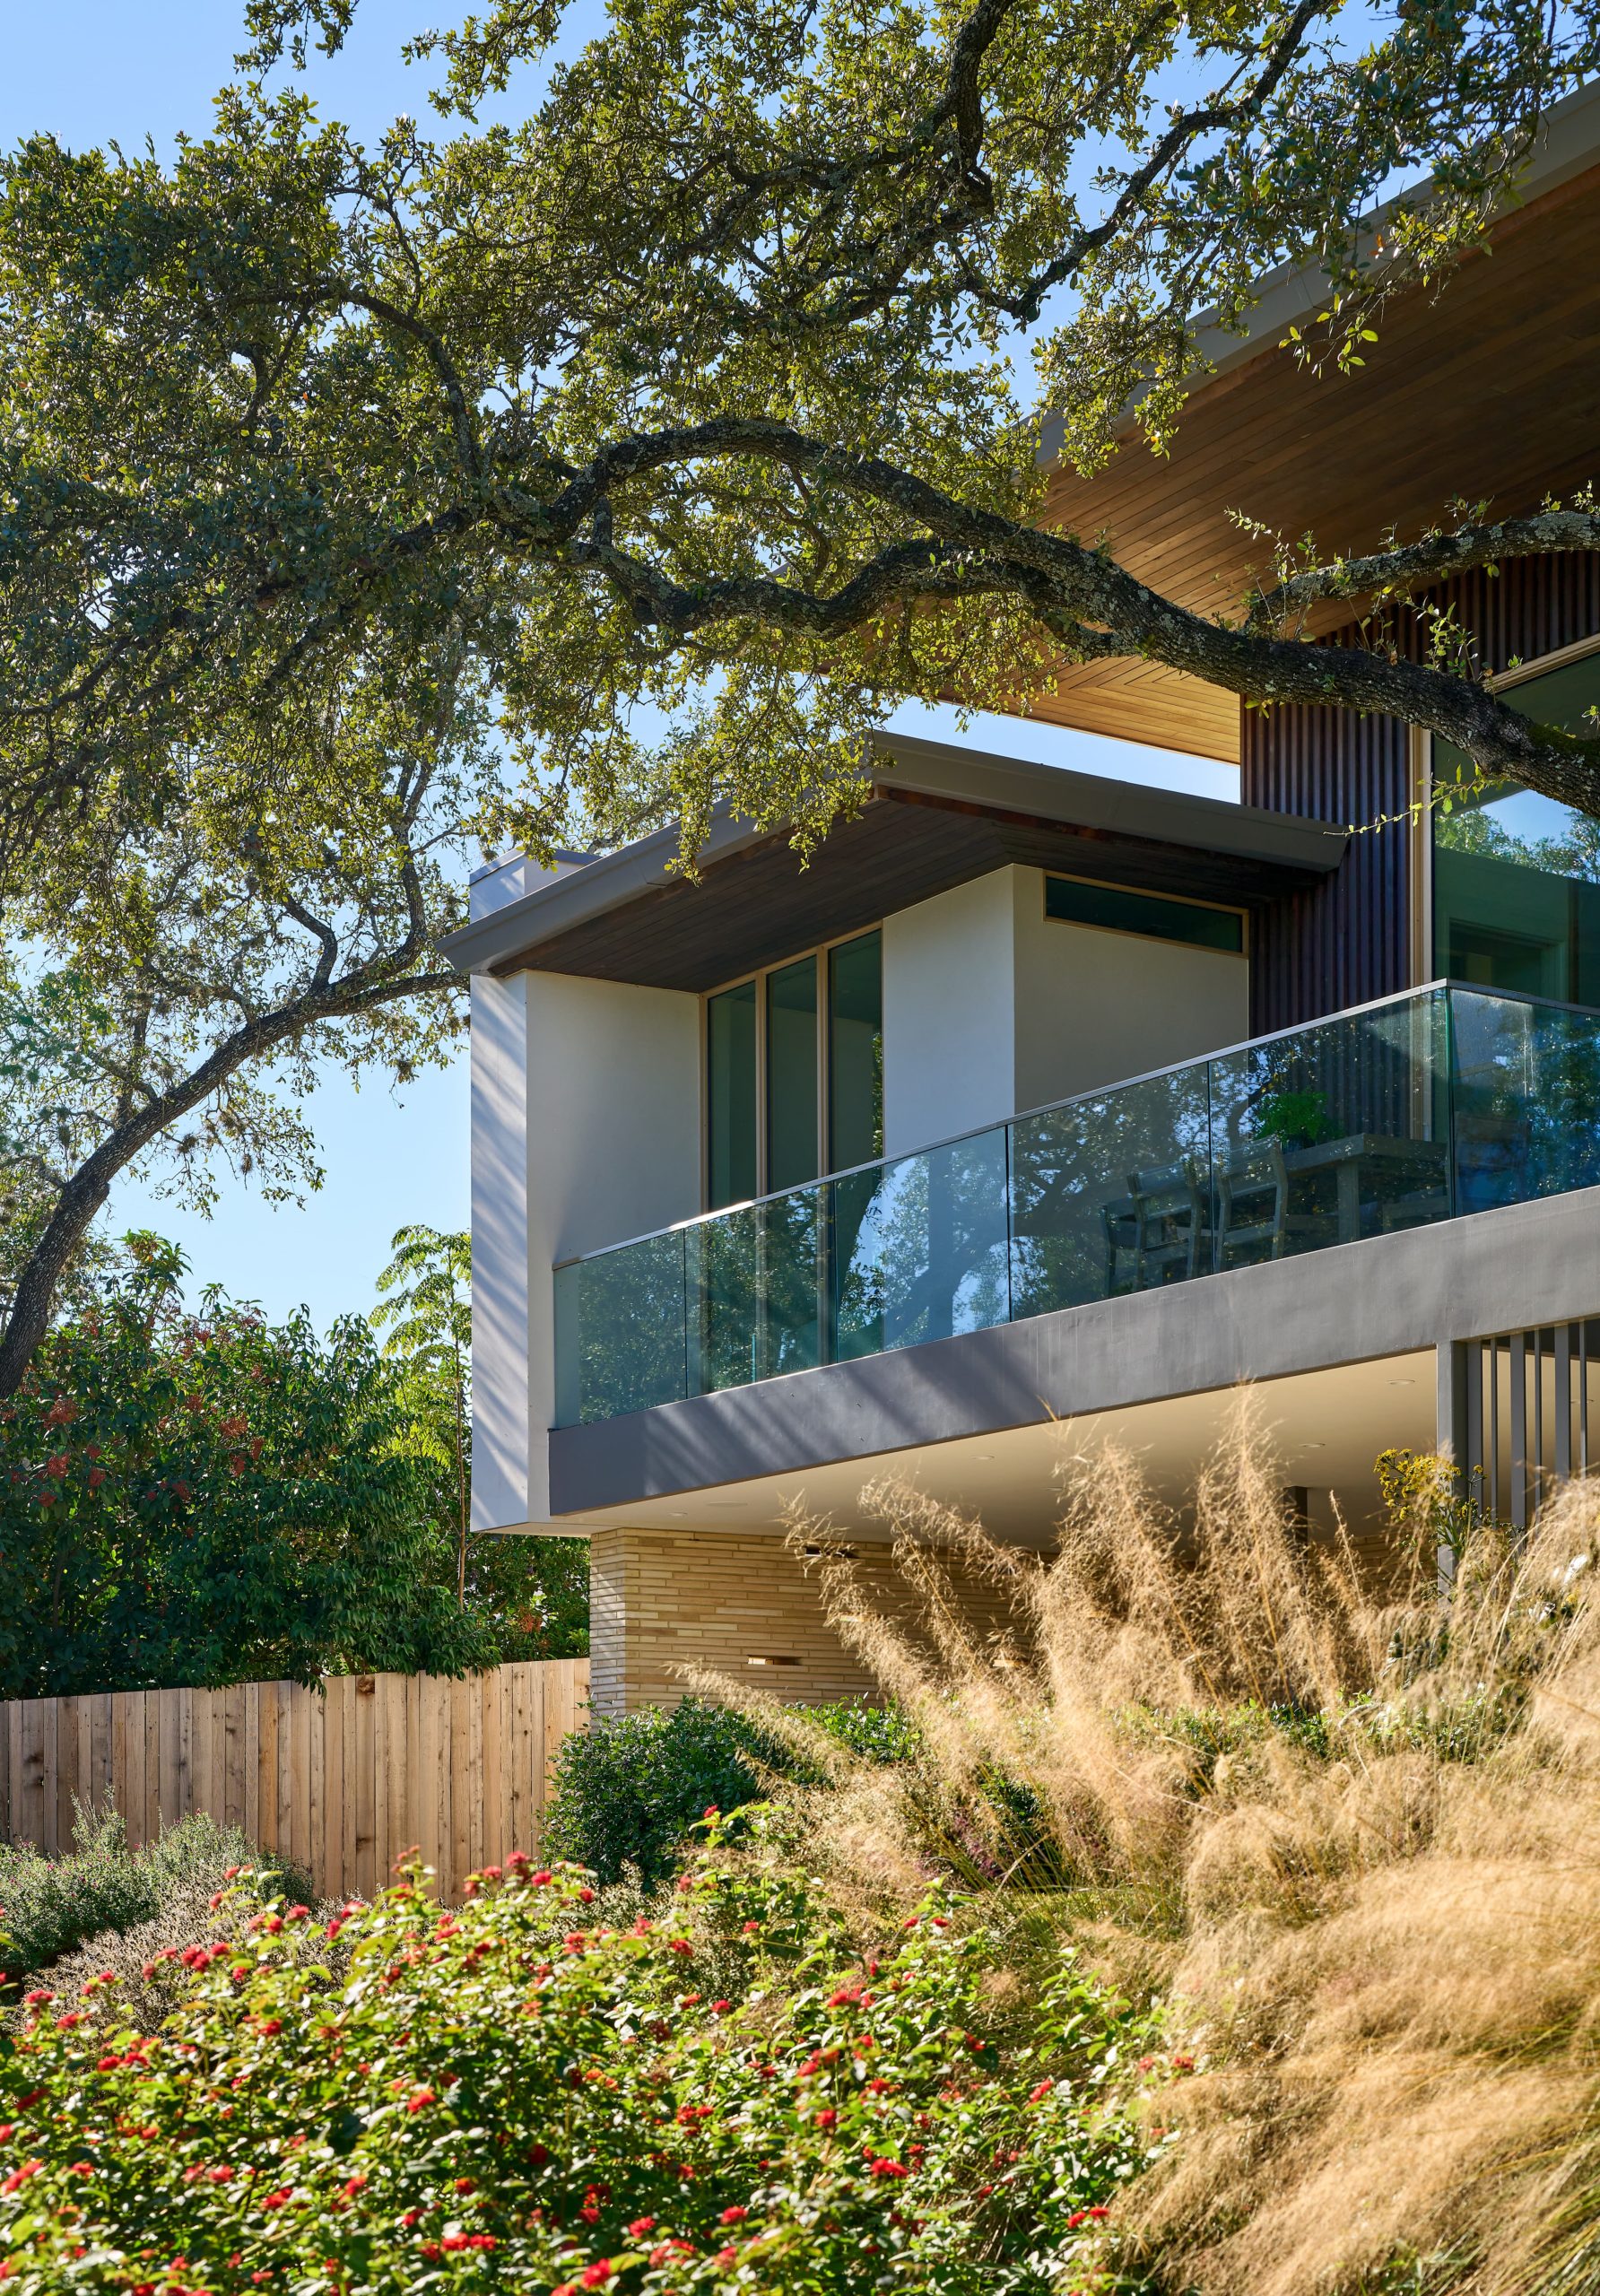 View of Backyard Balcony at Crestway Residence by Jay Corder Architect